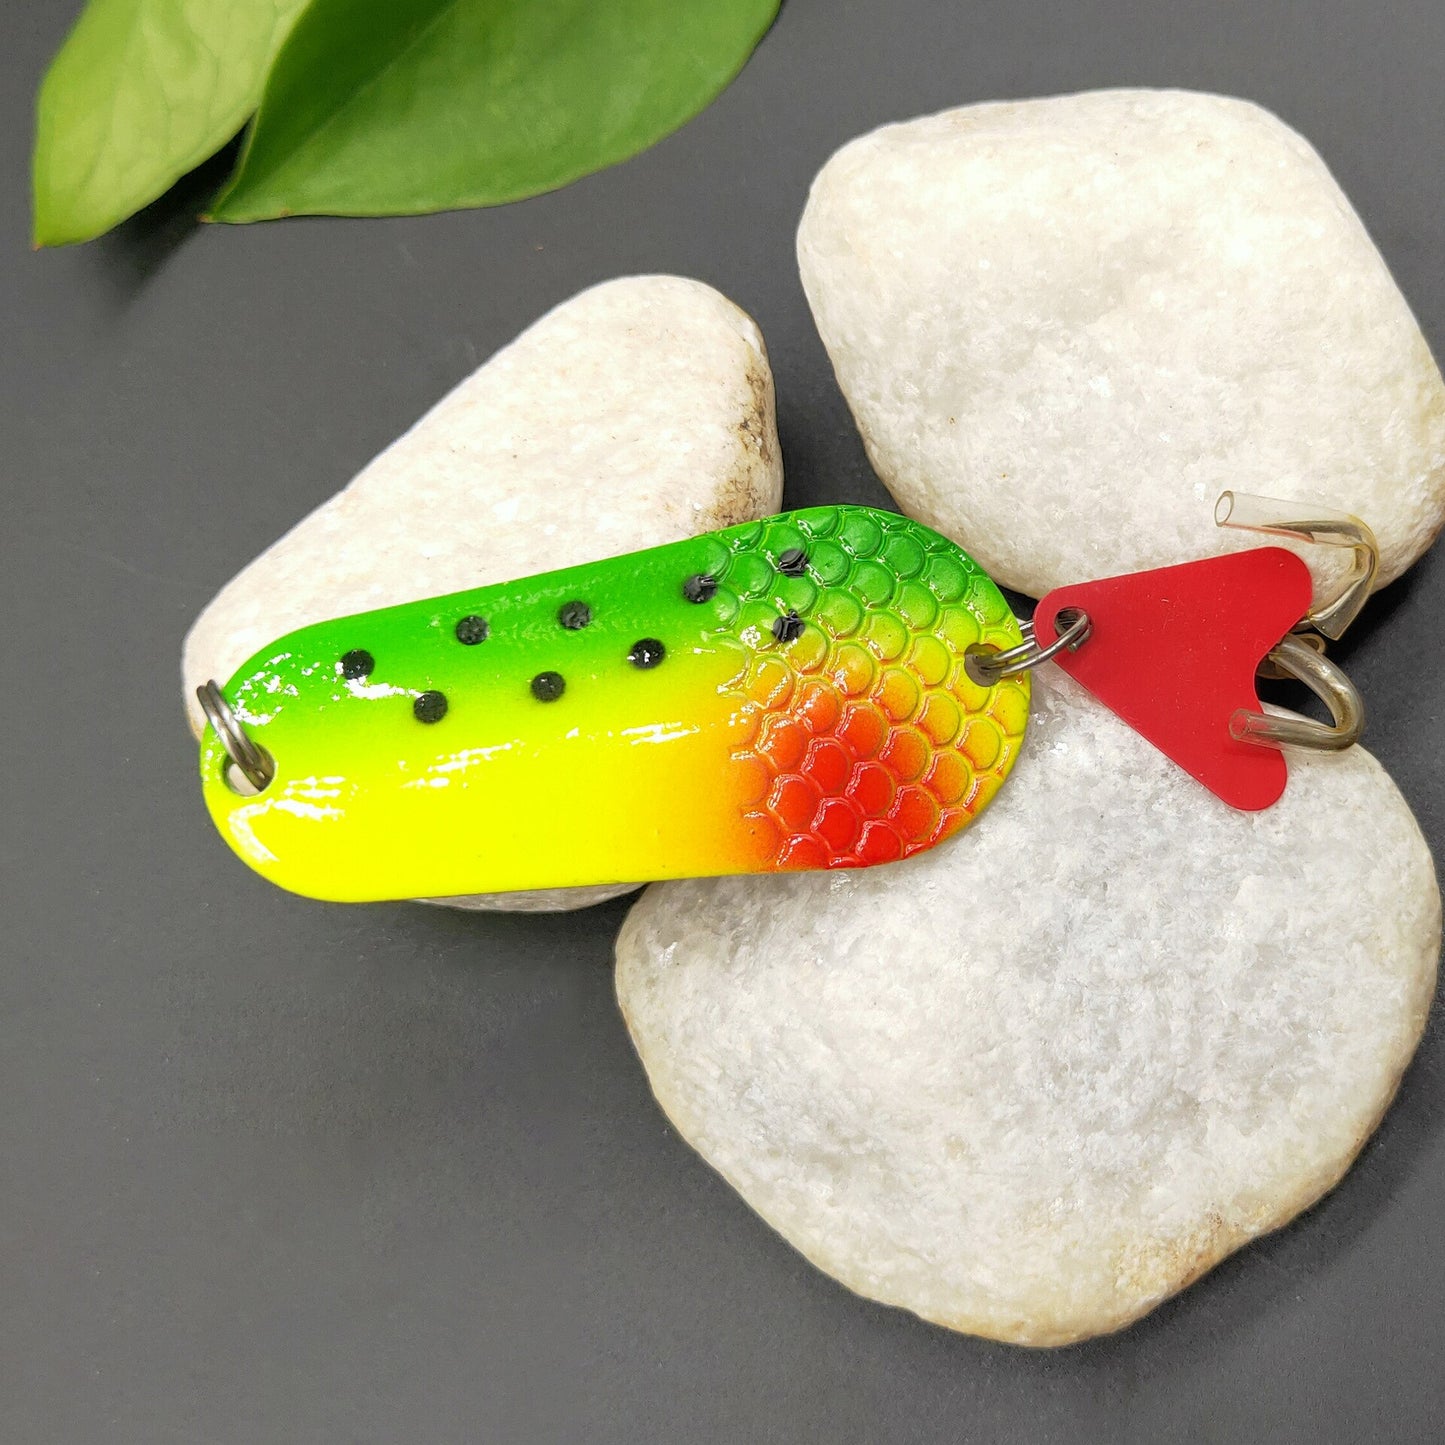 2Pc Pesca Isca Artificial Bait Rainbow Trout Spoon 19g 5.5cm Metal Fishing Lure Spoon Lure For Trout Perch Pike Salmon Long Shot